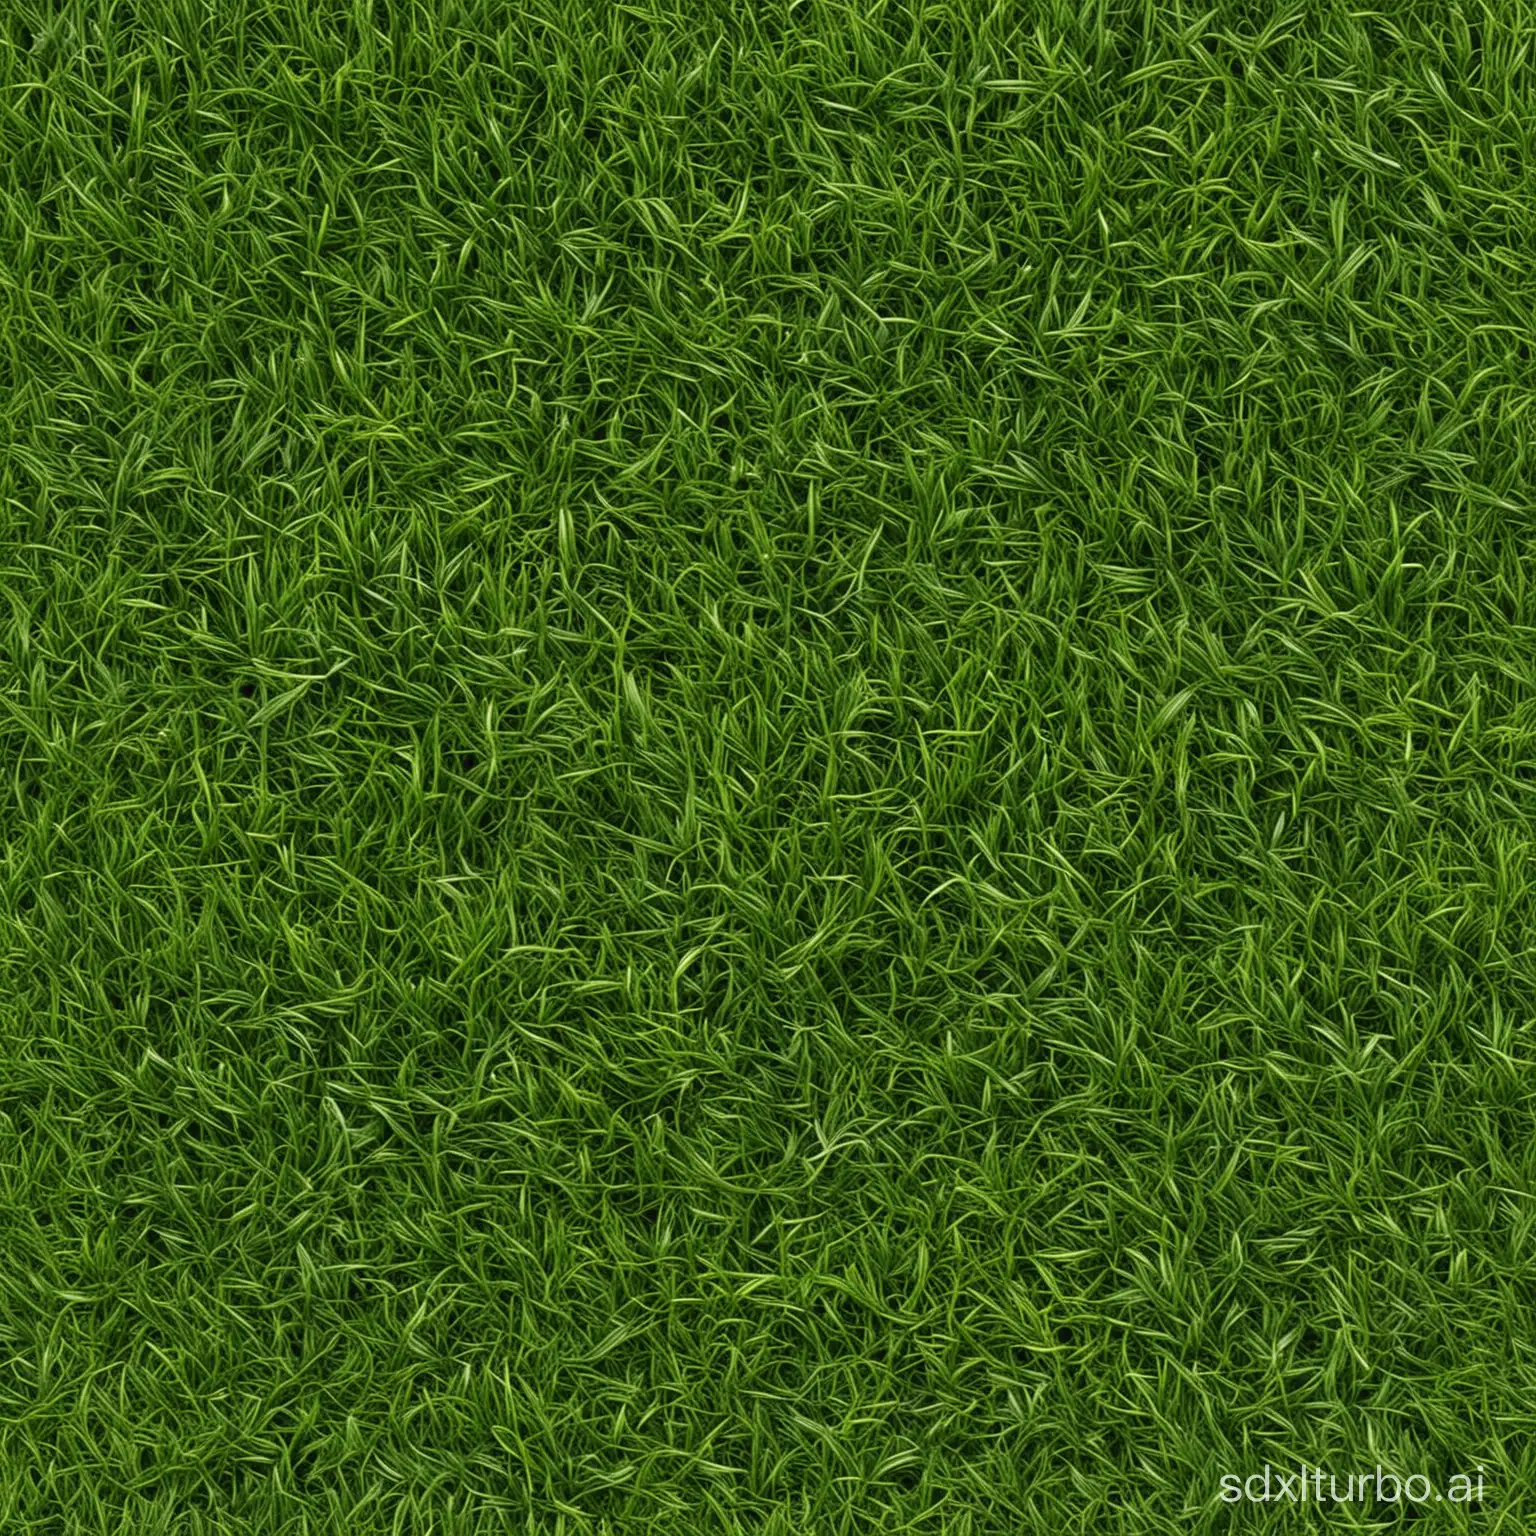 Lush-Green-Grass-Texture-for-Seamless-Backgrounds